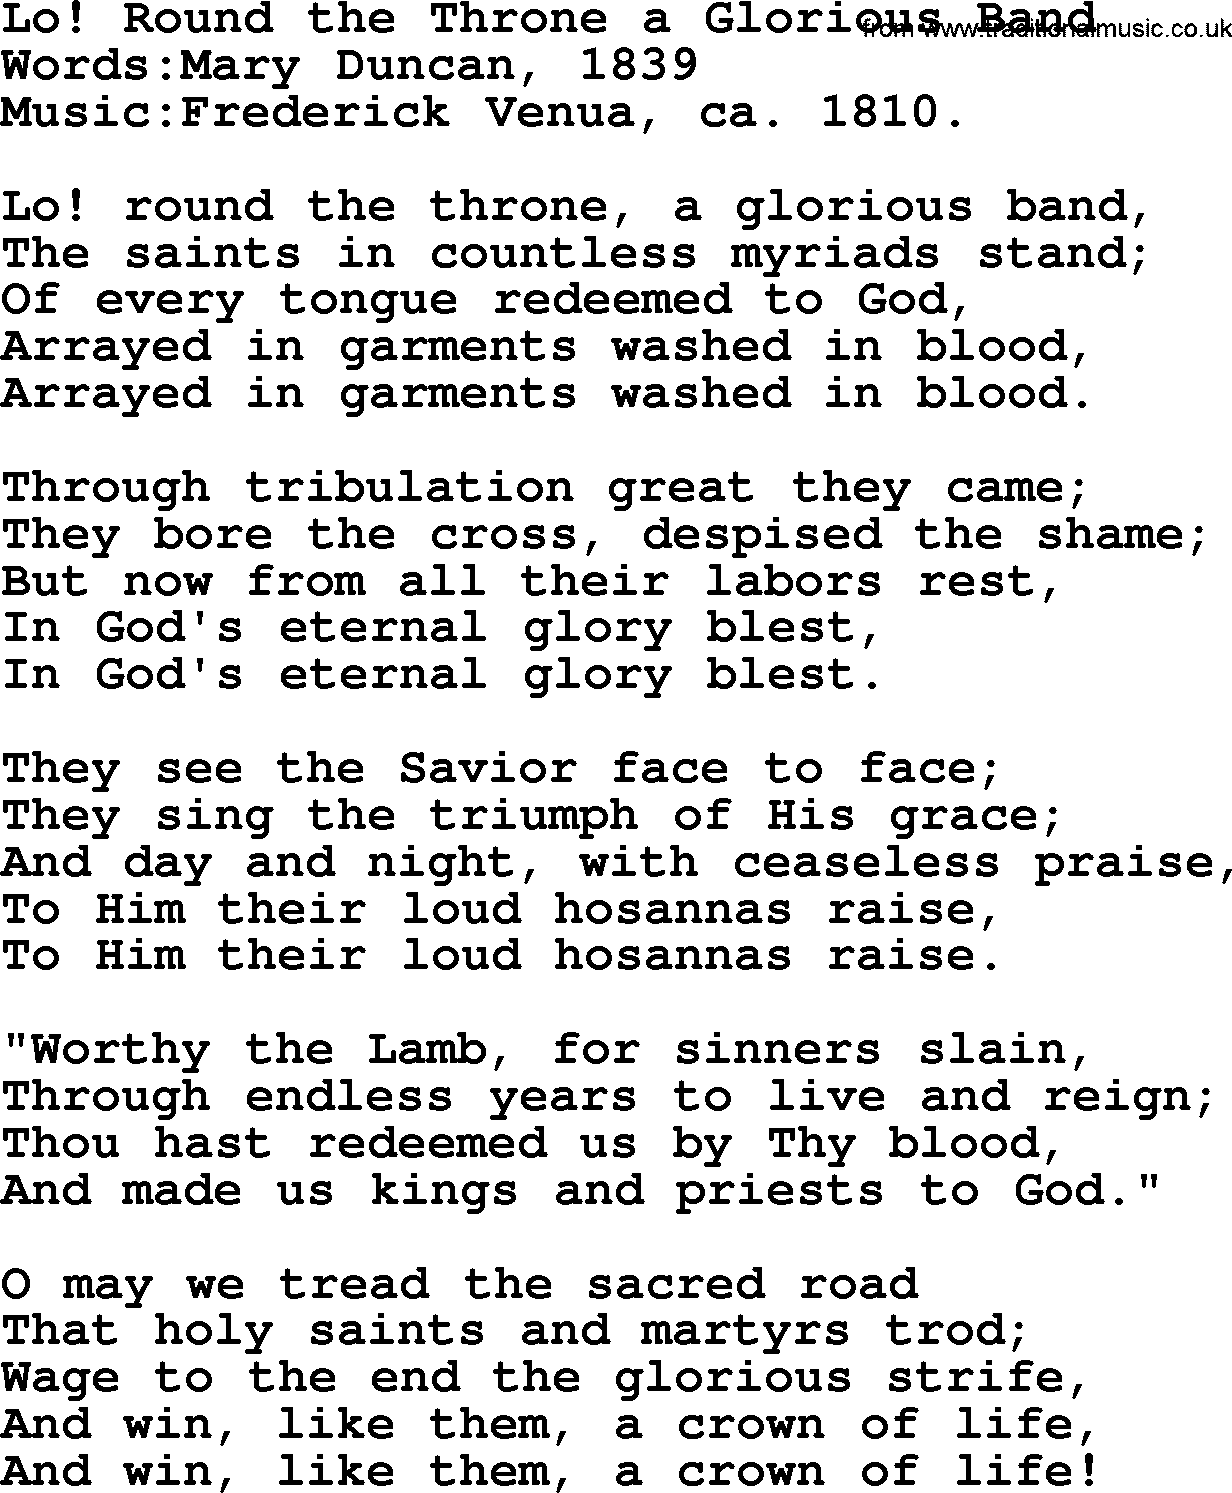 Songs and Hymns about Heaven: Lo! Round The Throne A Glorious Band lyrics with PDF